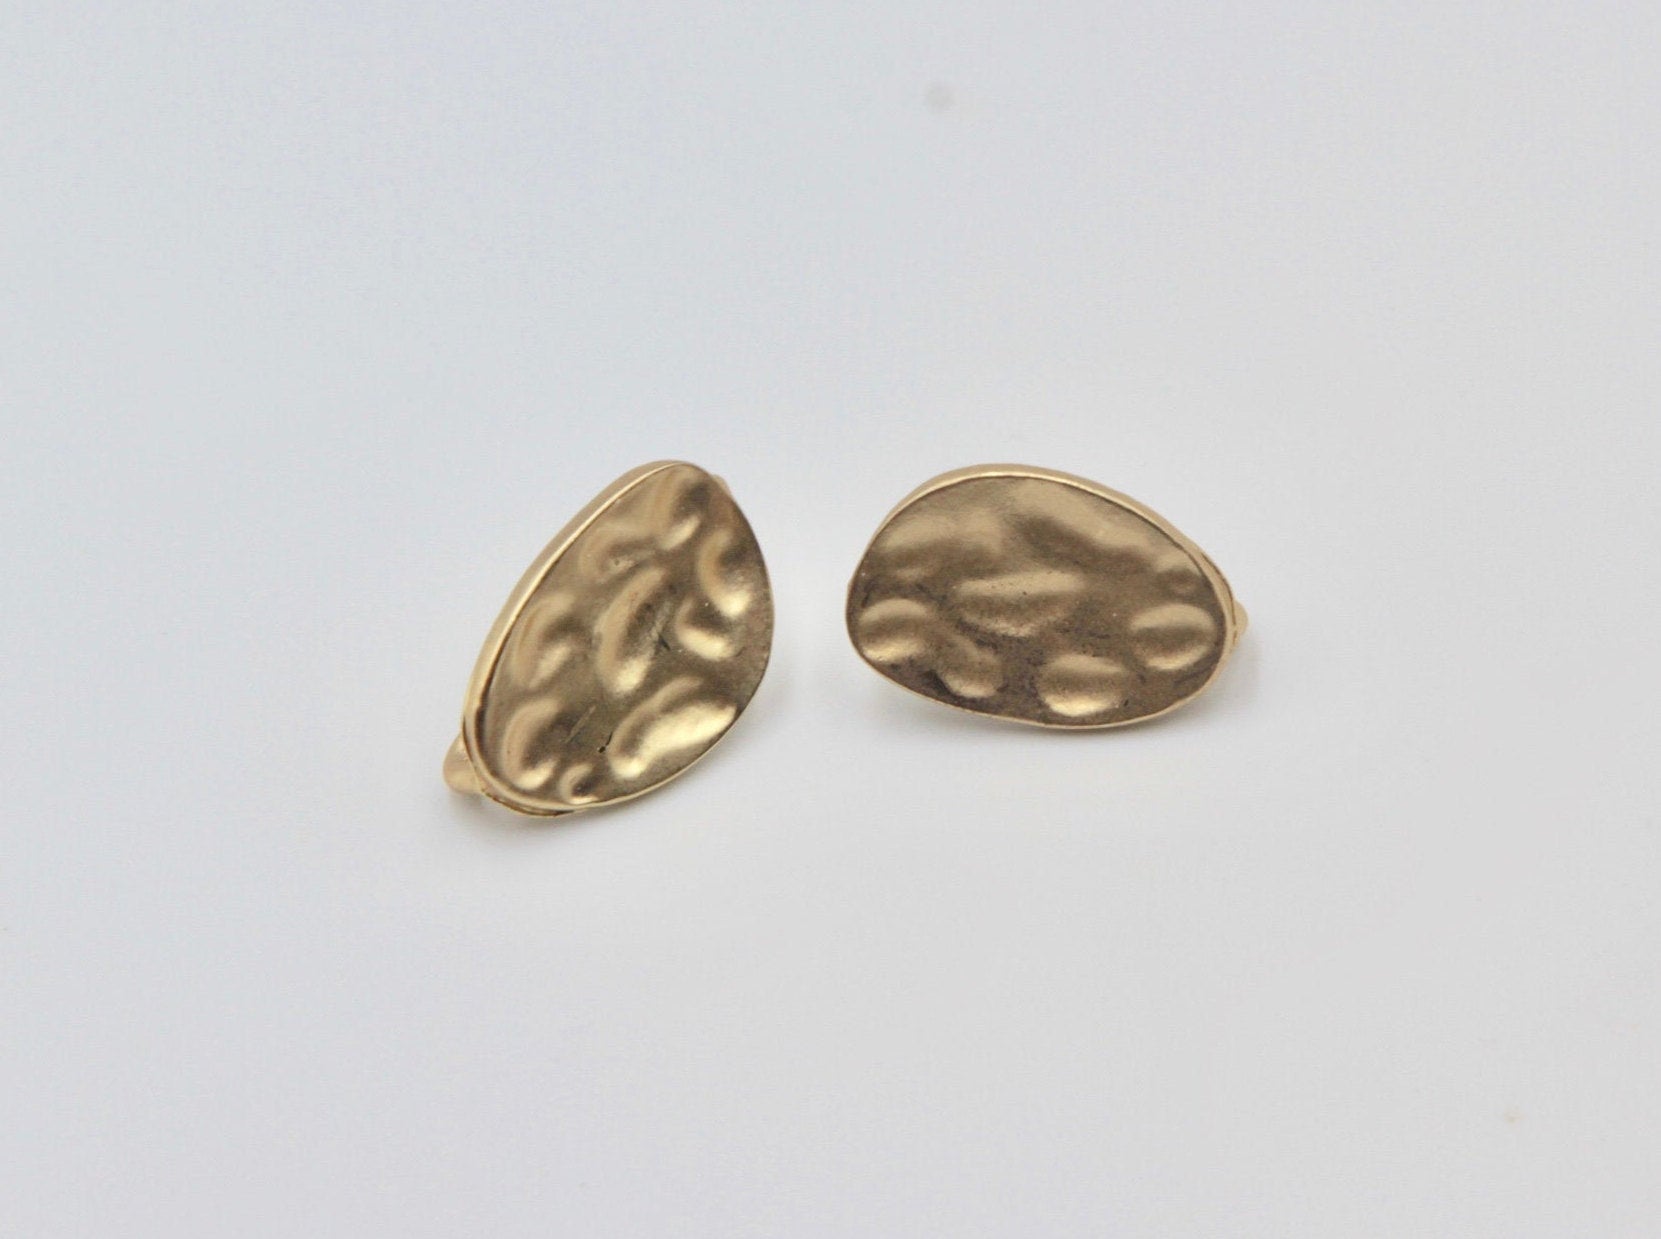 1 pair(2pcs), 13mmx19mm, Vintage Style Distorted Oval Alloy Ear Stud in Matt Gold